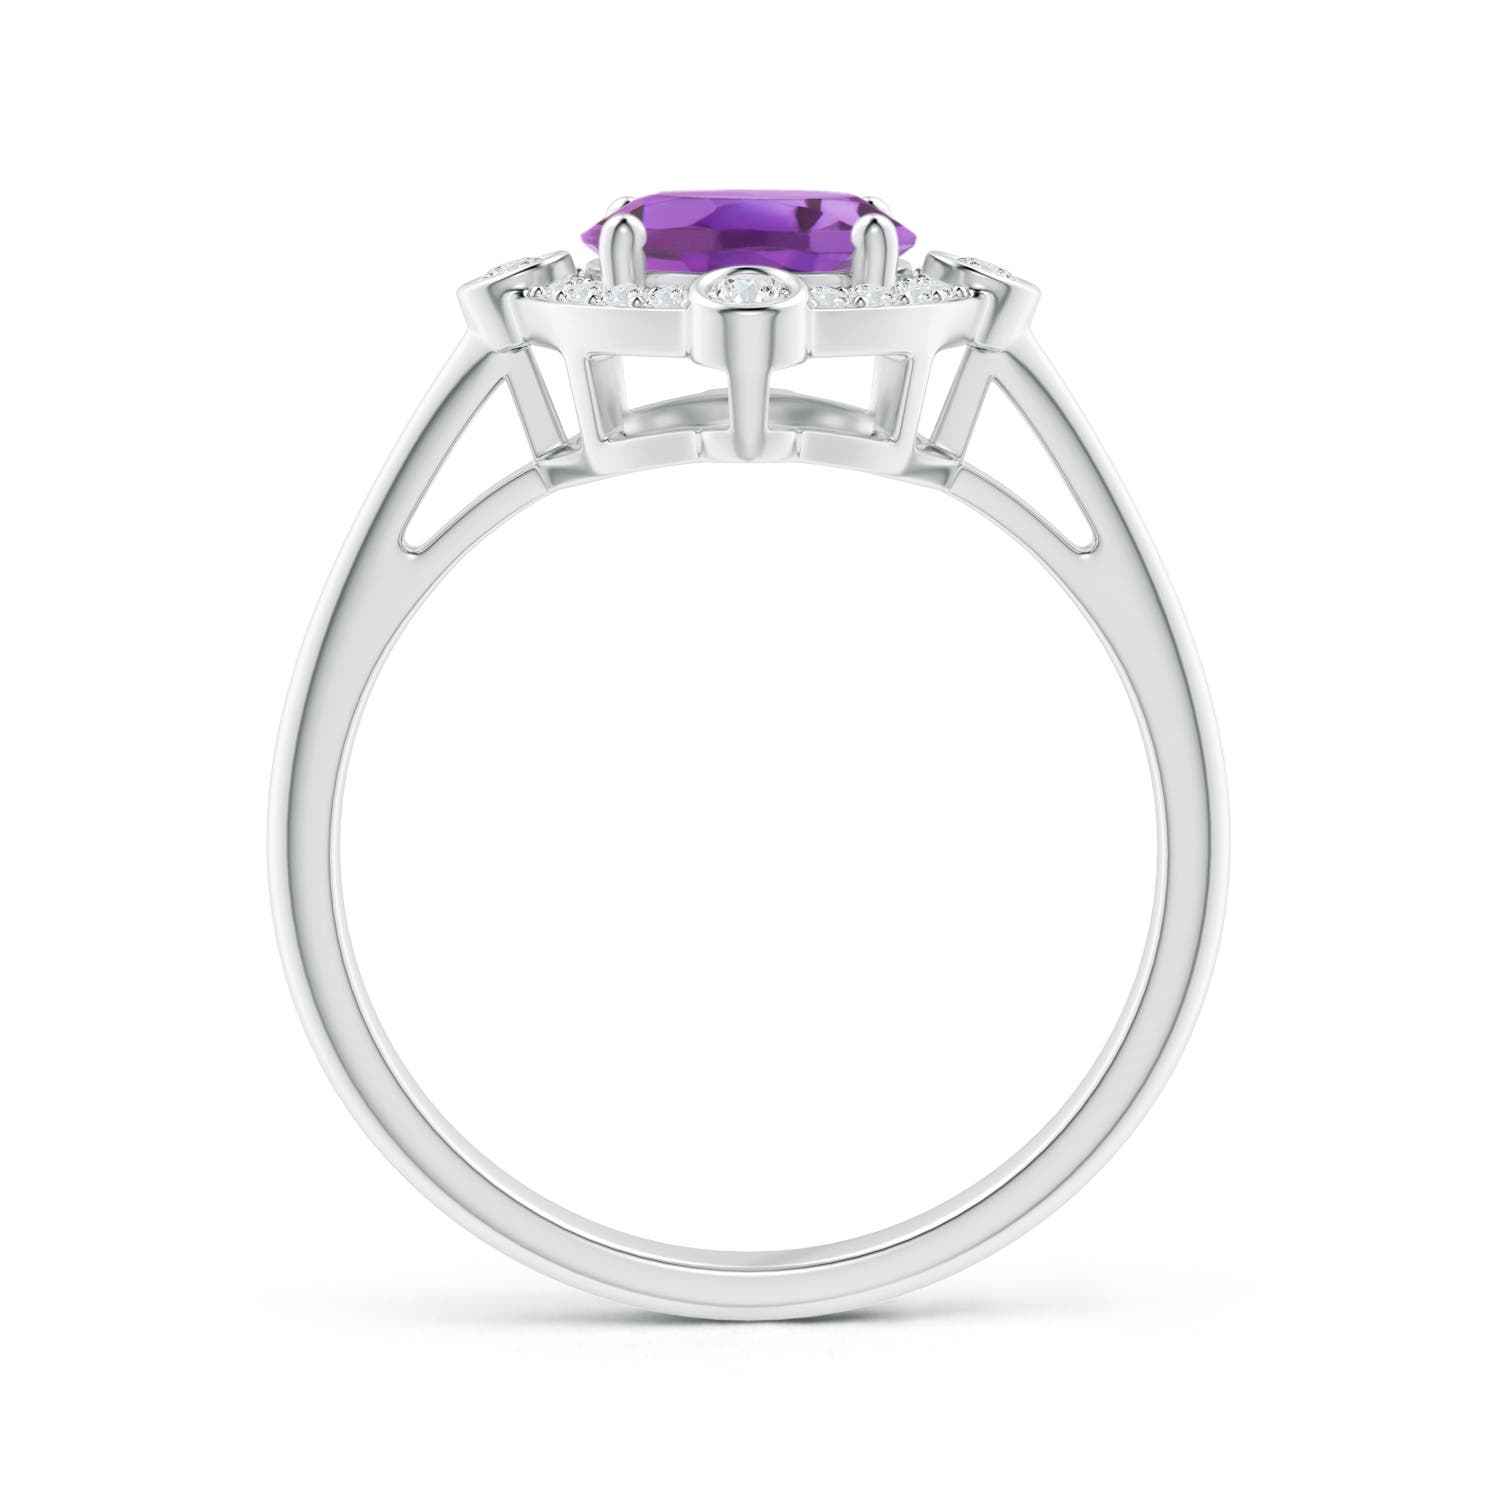 A - Amethyst / 1.74 CT / 14 KT White Gold